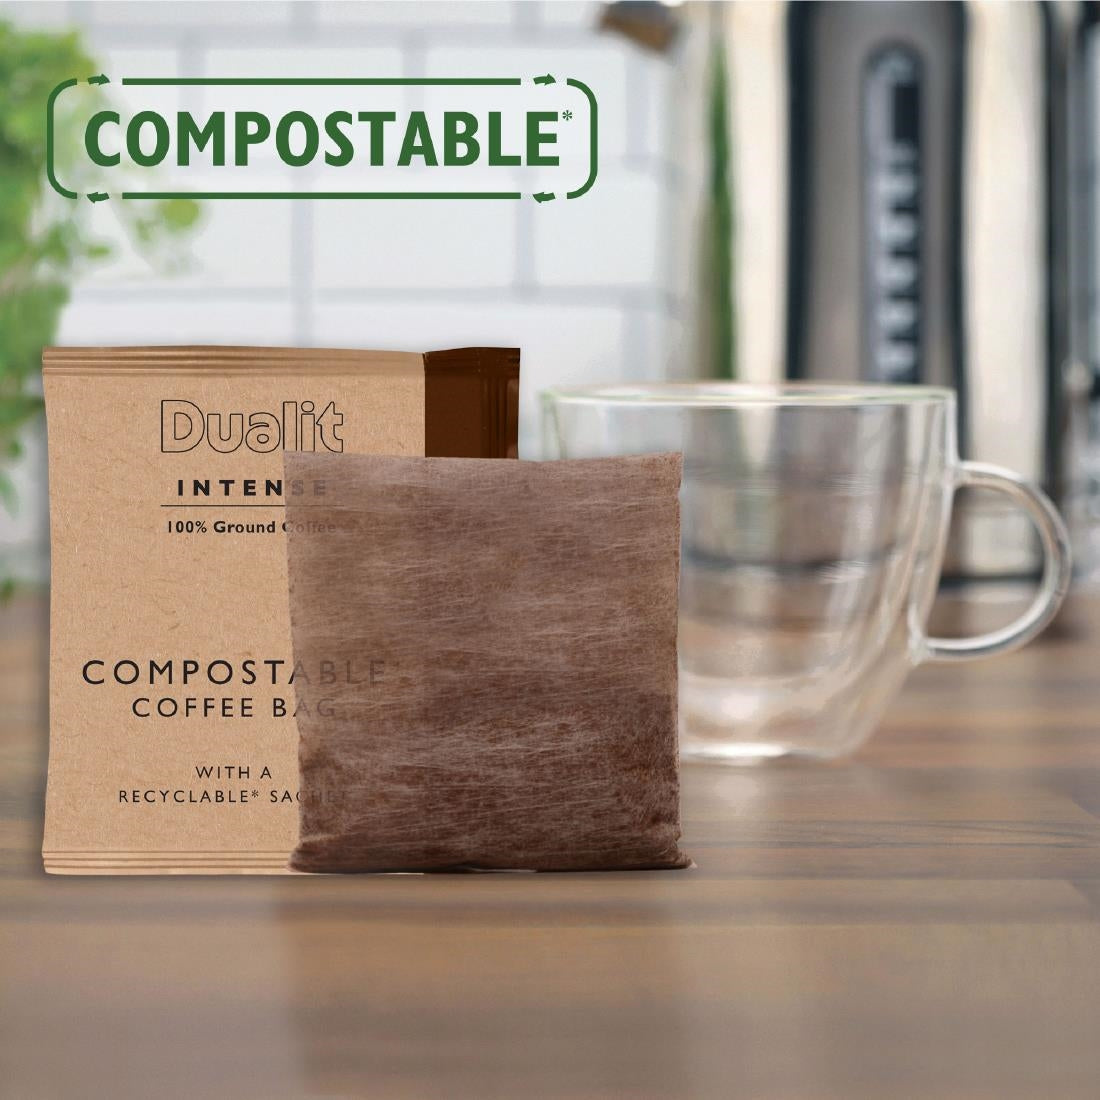 FX187 Dualit Intense Compostable Coffee Bags (Pack of 40)